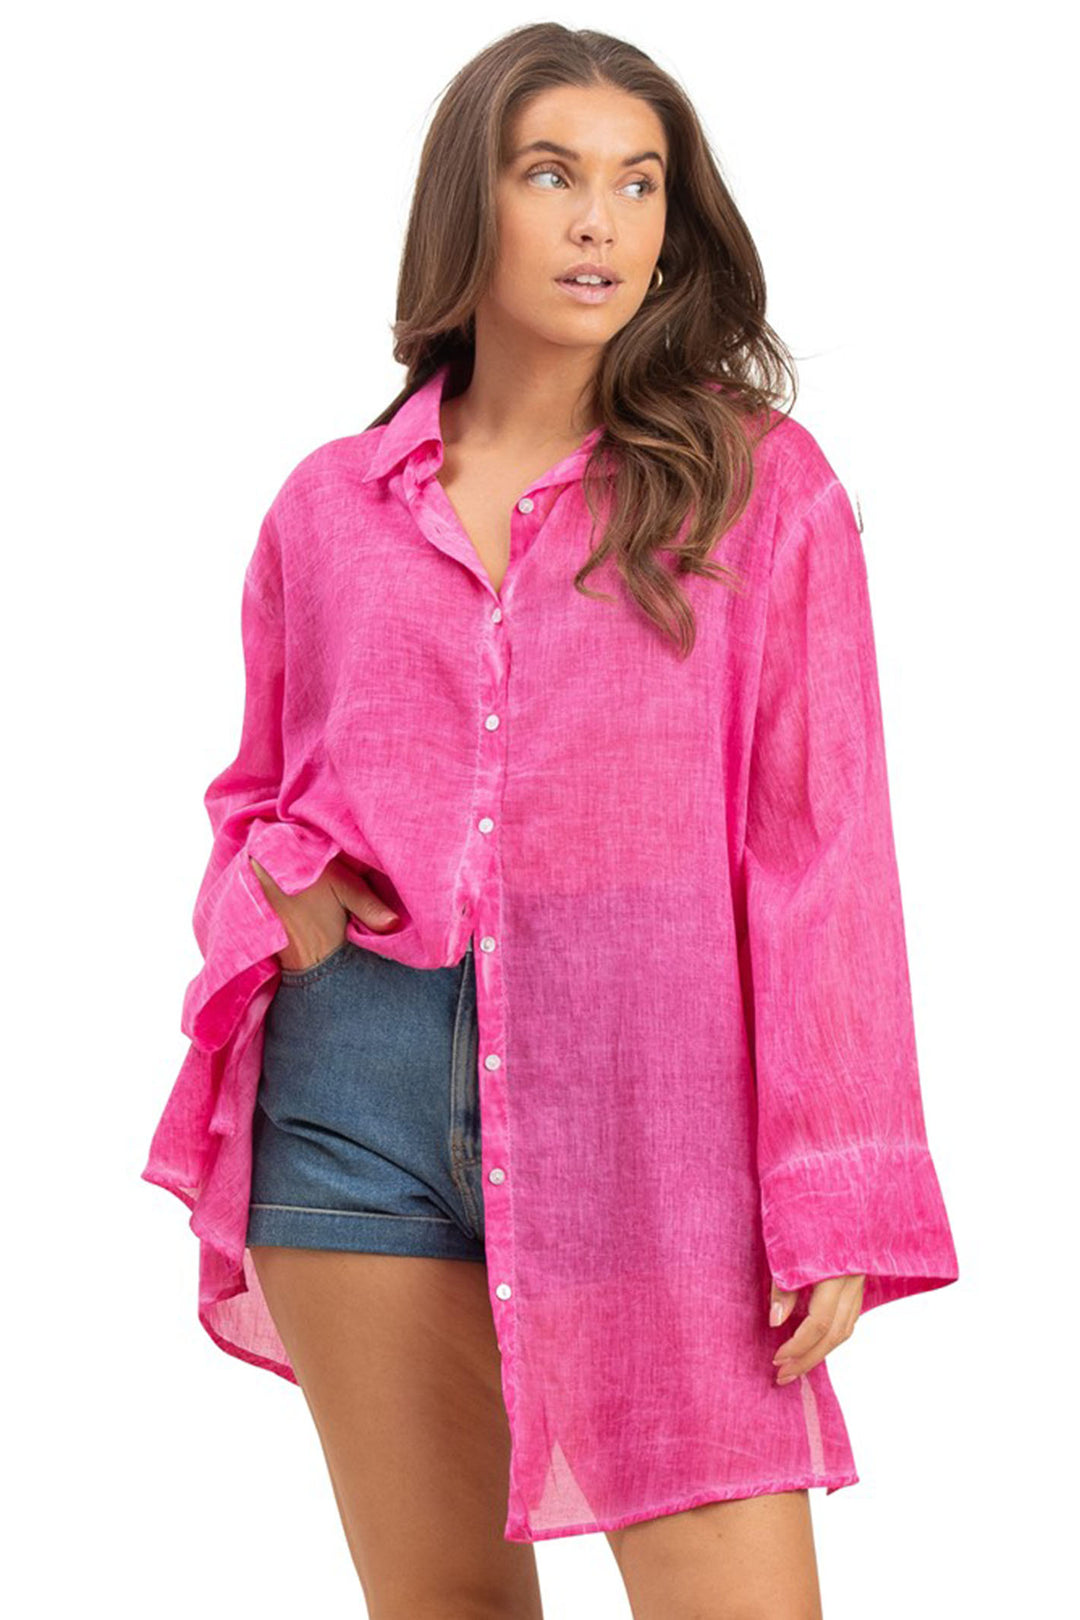 Terre Rouge KSPRO2-308 Fuchsia Pink Washed Look Shirt - Experience Boutique